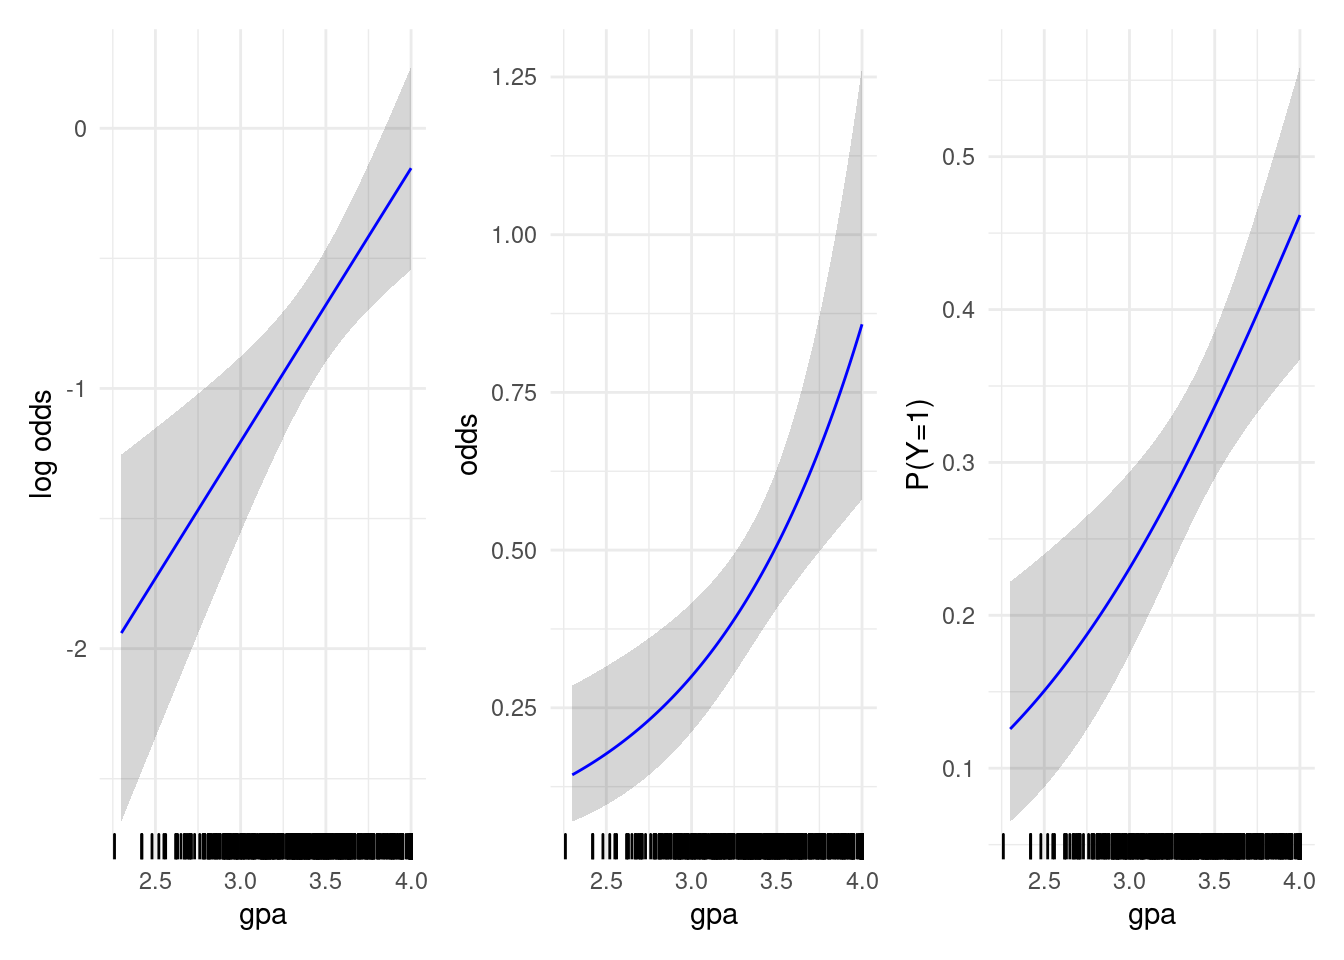 Graduate admission probability as a function of grade point averages (GPA) on the log odds (left), odds (middle) and probability of success scale (right). The line indicates fitted value with pointwise 95\% profile-based confidence intervals.